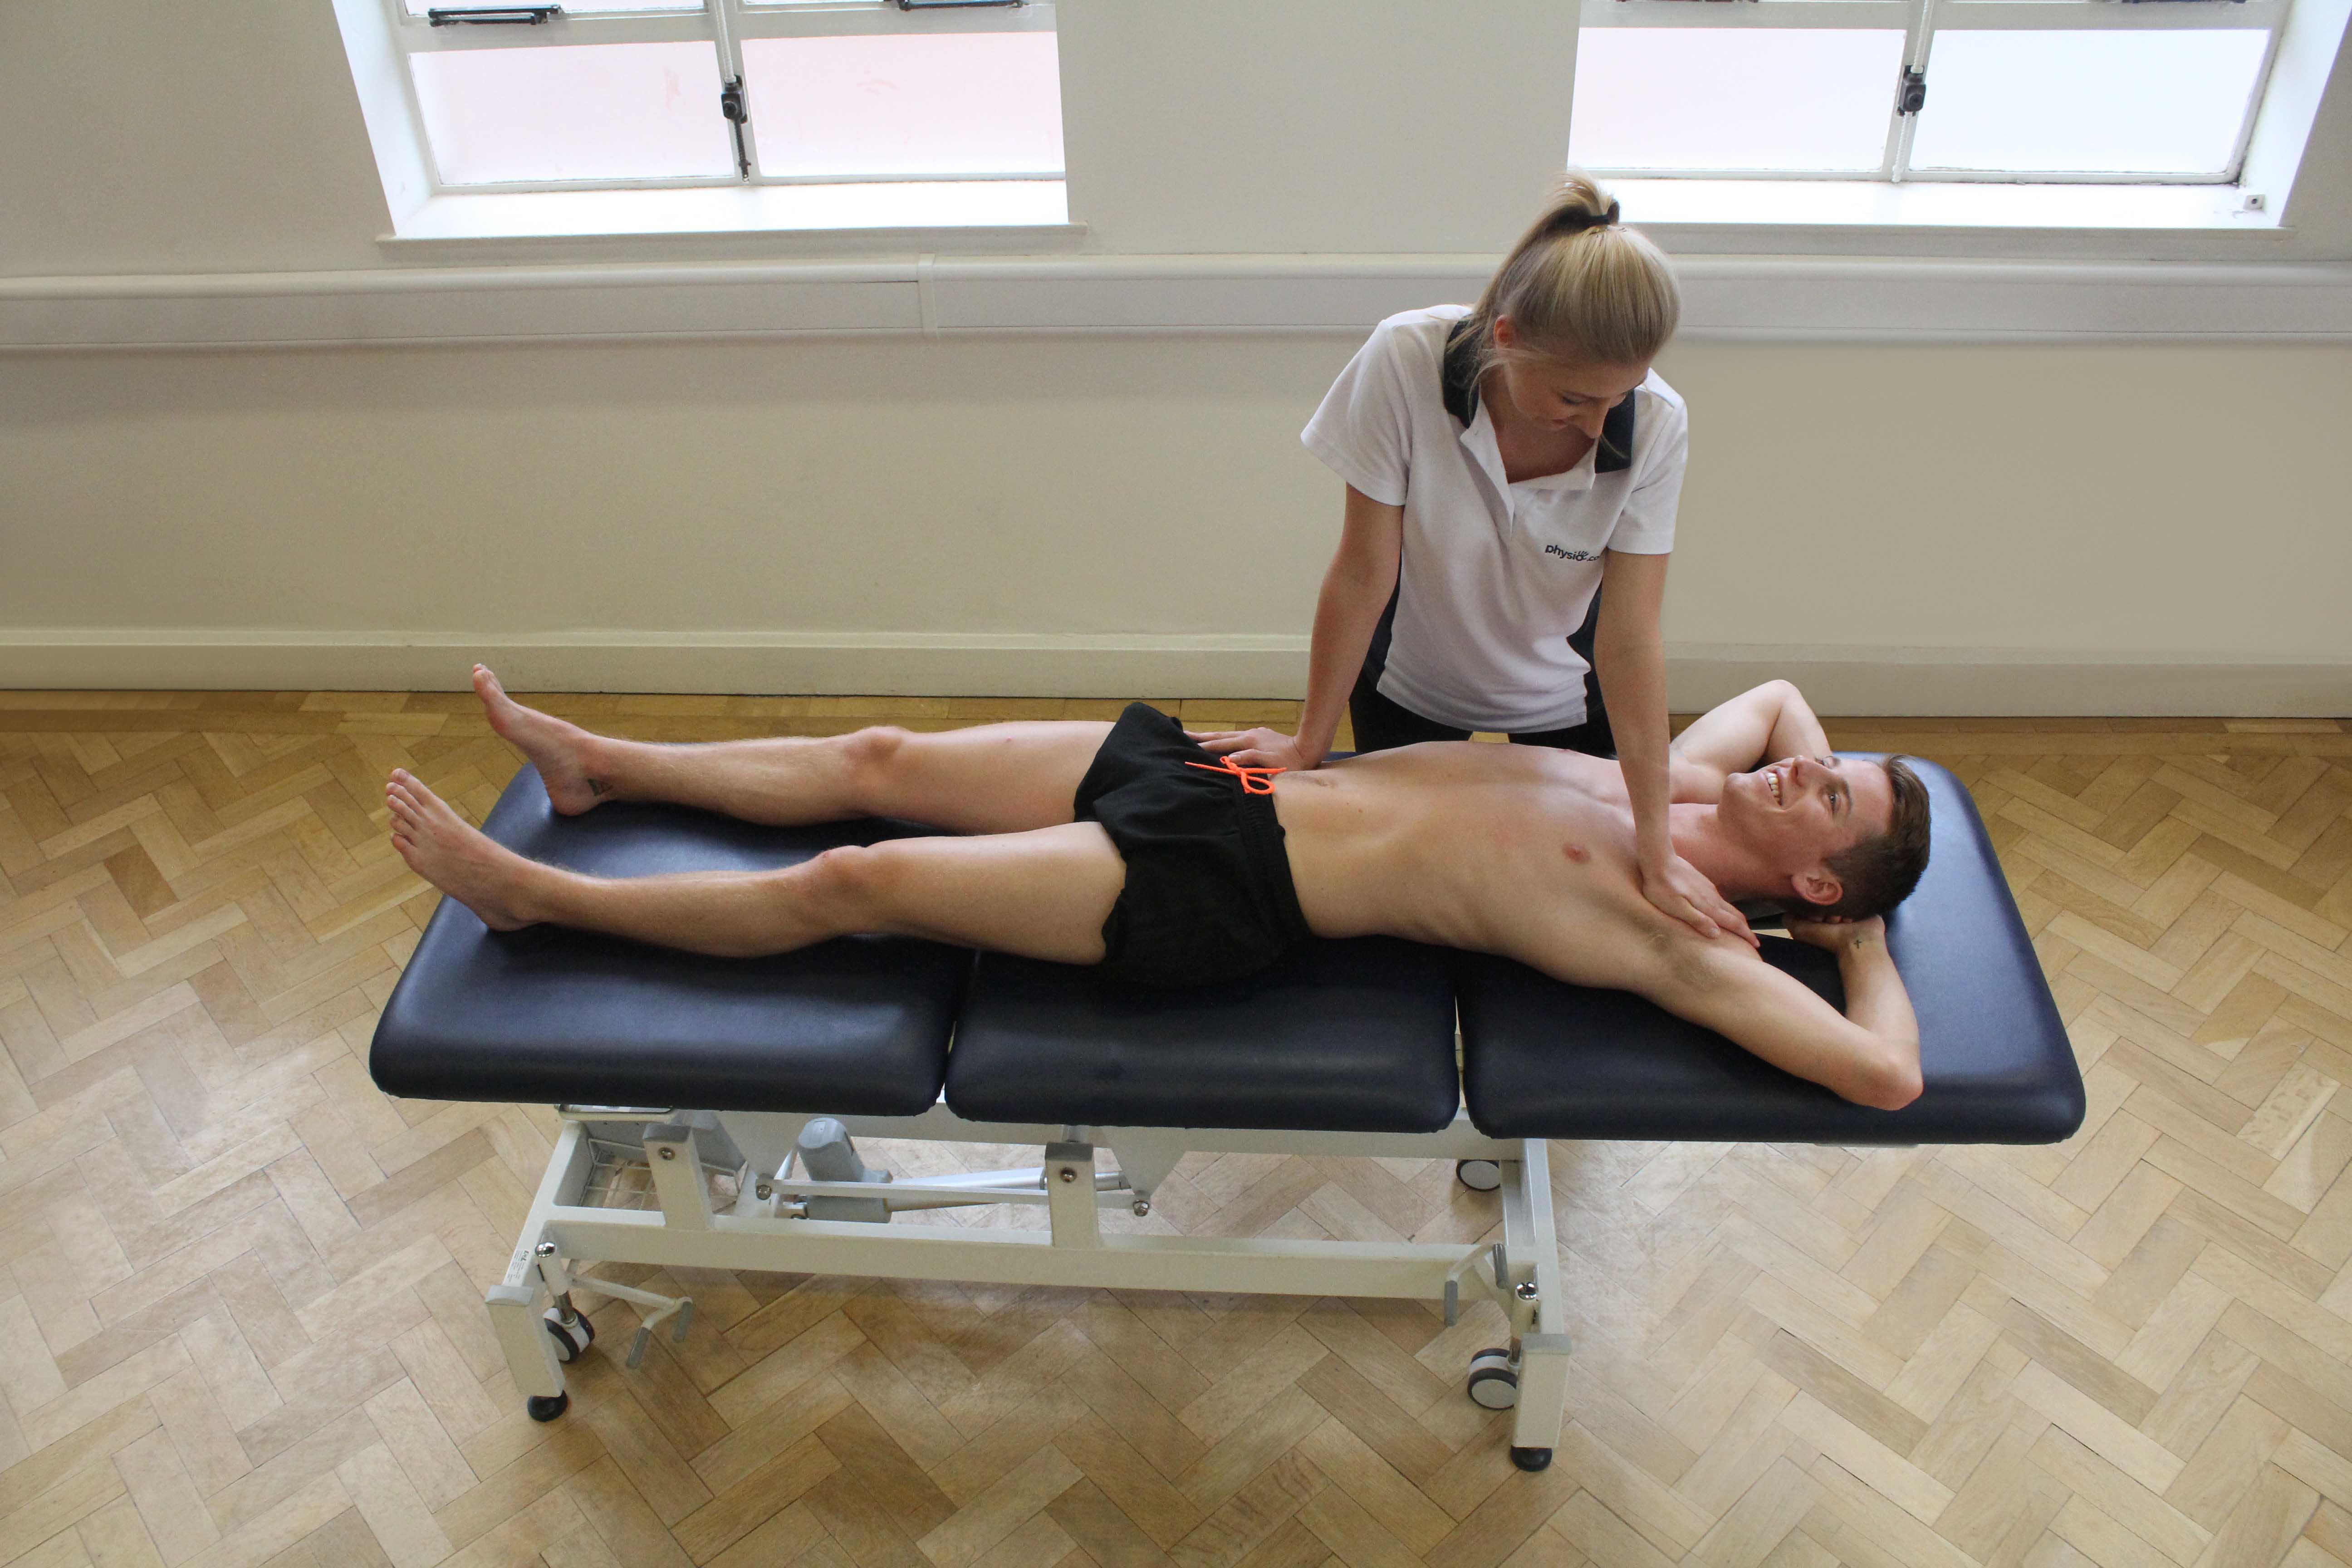 Soft tissue massage of the abdominal muscles by an experienced therapist